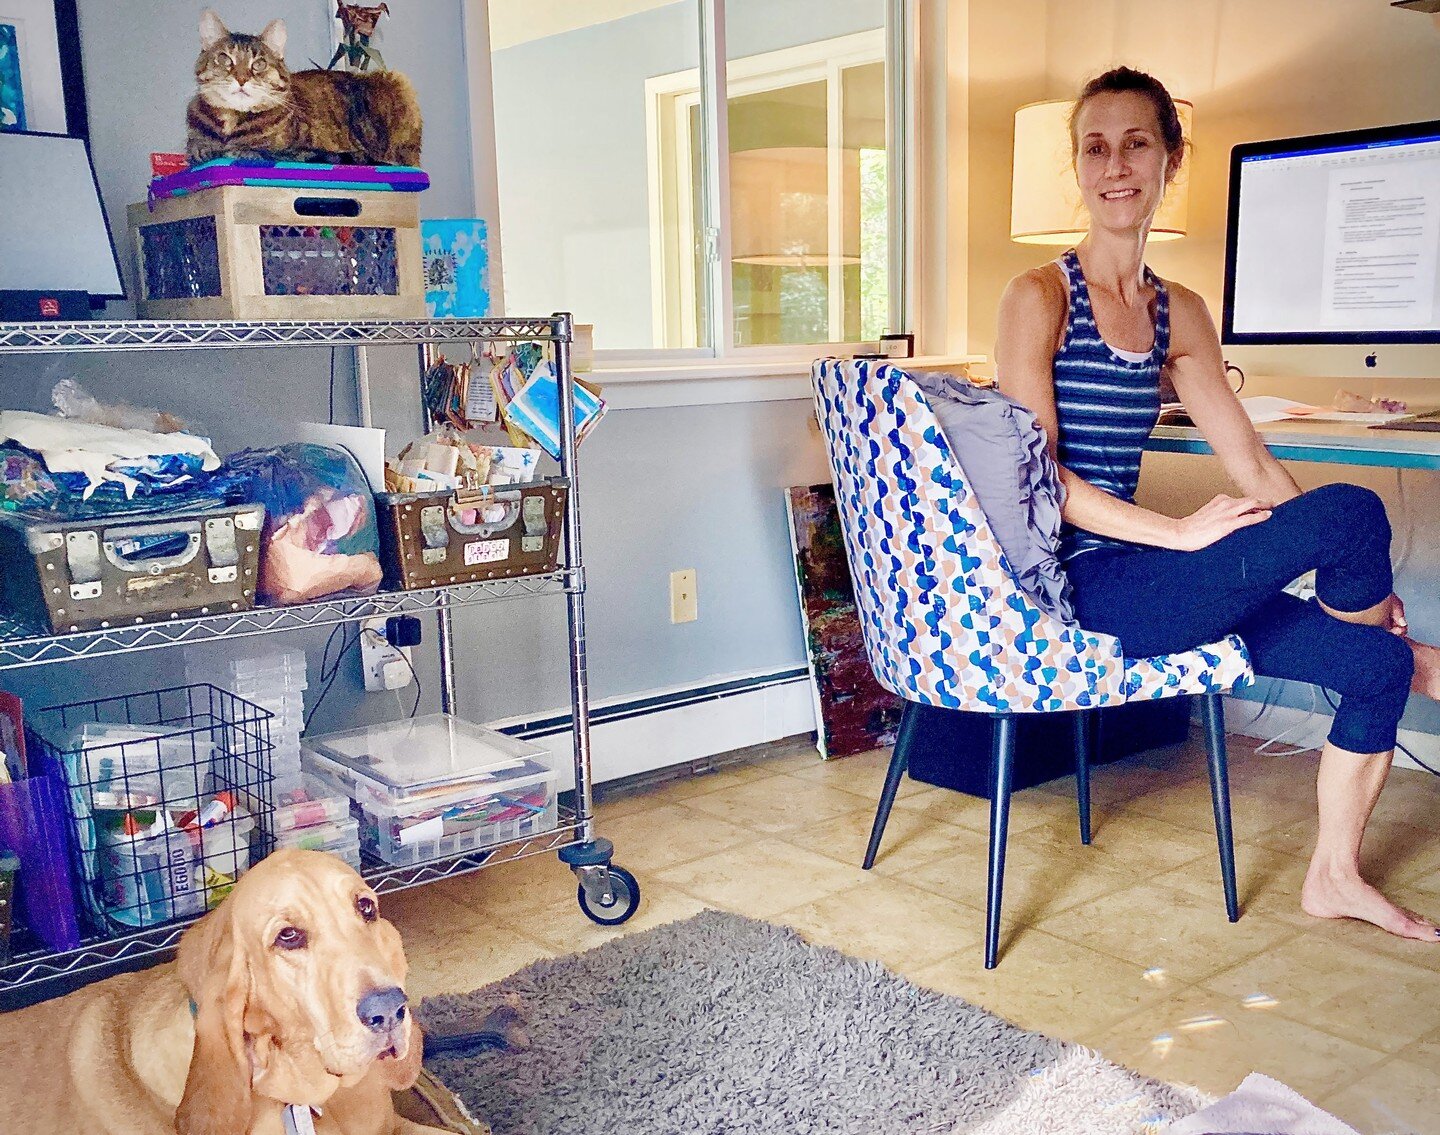 There are times in life when it is so important and meaningful to just slow down and create space for reflection. This space looks different for many, but I thought I'd show up right here - right now and share this &quot;behind the scenes&quot; post.